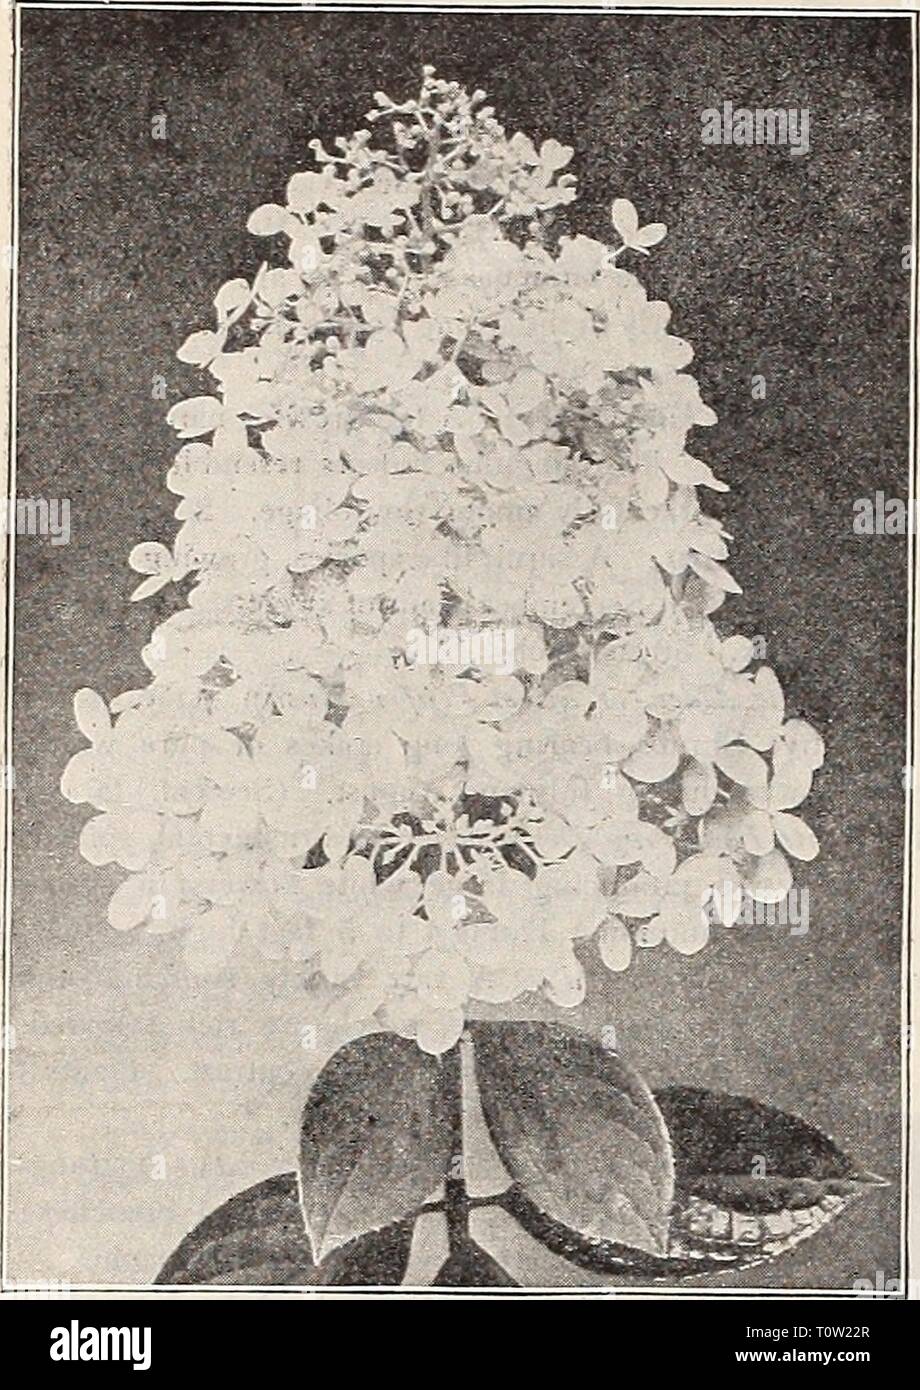 Dreer's 1907 garden book (1907) Dreer's 1907 garden book  dreers1907garden1907henr Year: 1907  Hydrangea Paniculata Grandiflora. plena. A tine double white Deutzia Candidissima 25 cts. each. â Crenata rosea plena {Double-flowering Deutzia). Double-white, tinged with pink ; very desirable. 25 cts. each. â Gracilis. A favorite dwarf bush, covered with spikes of pure white flowers in early summer. 25 cts. each ; $2.50 per doz. Campanulata. A new white sort, with large, open, salver-shaped flowers. 25 cts. each. Rosea. Flowers twice the size of D.gracilis and suf- fused with delicate pink ; a gran Stock Photo